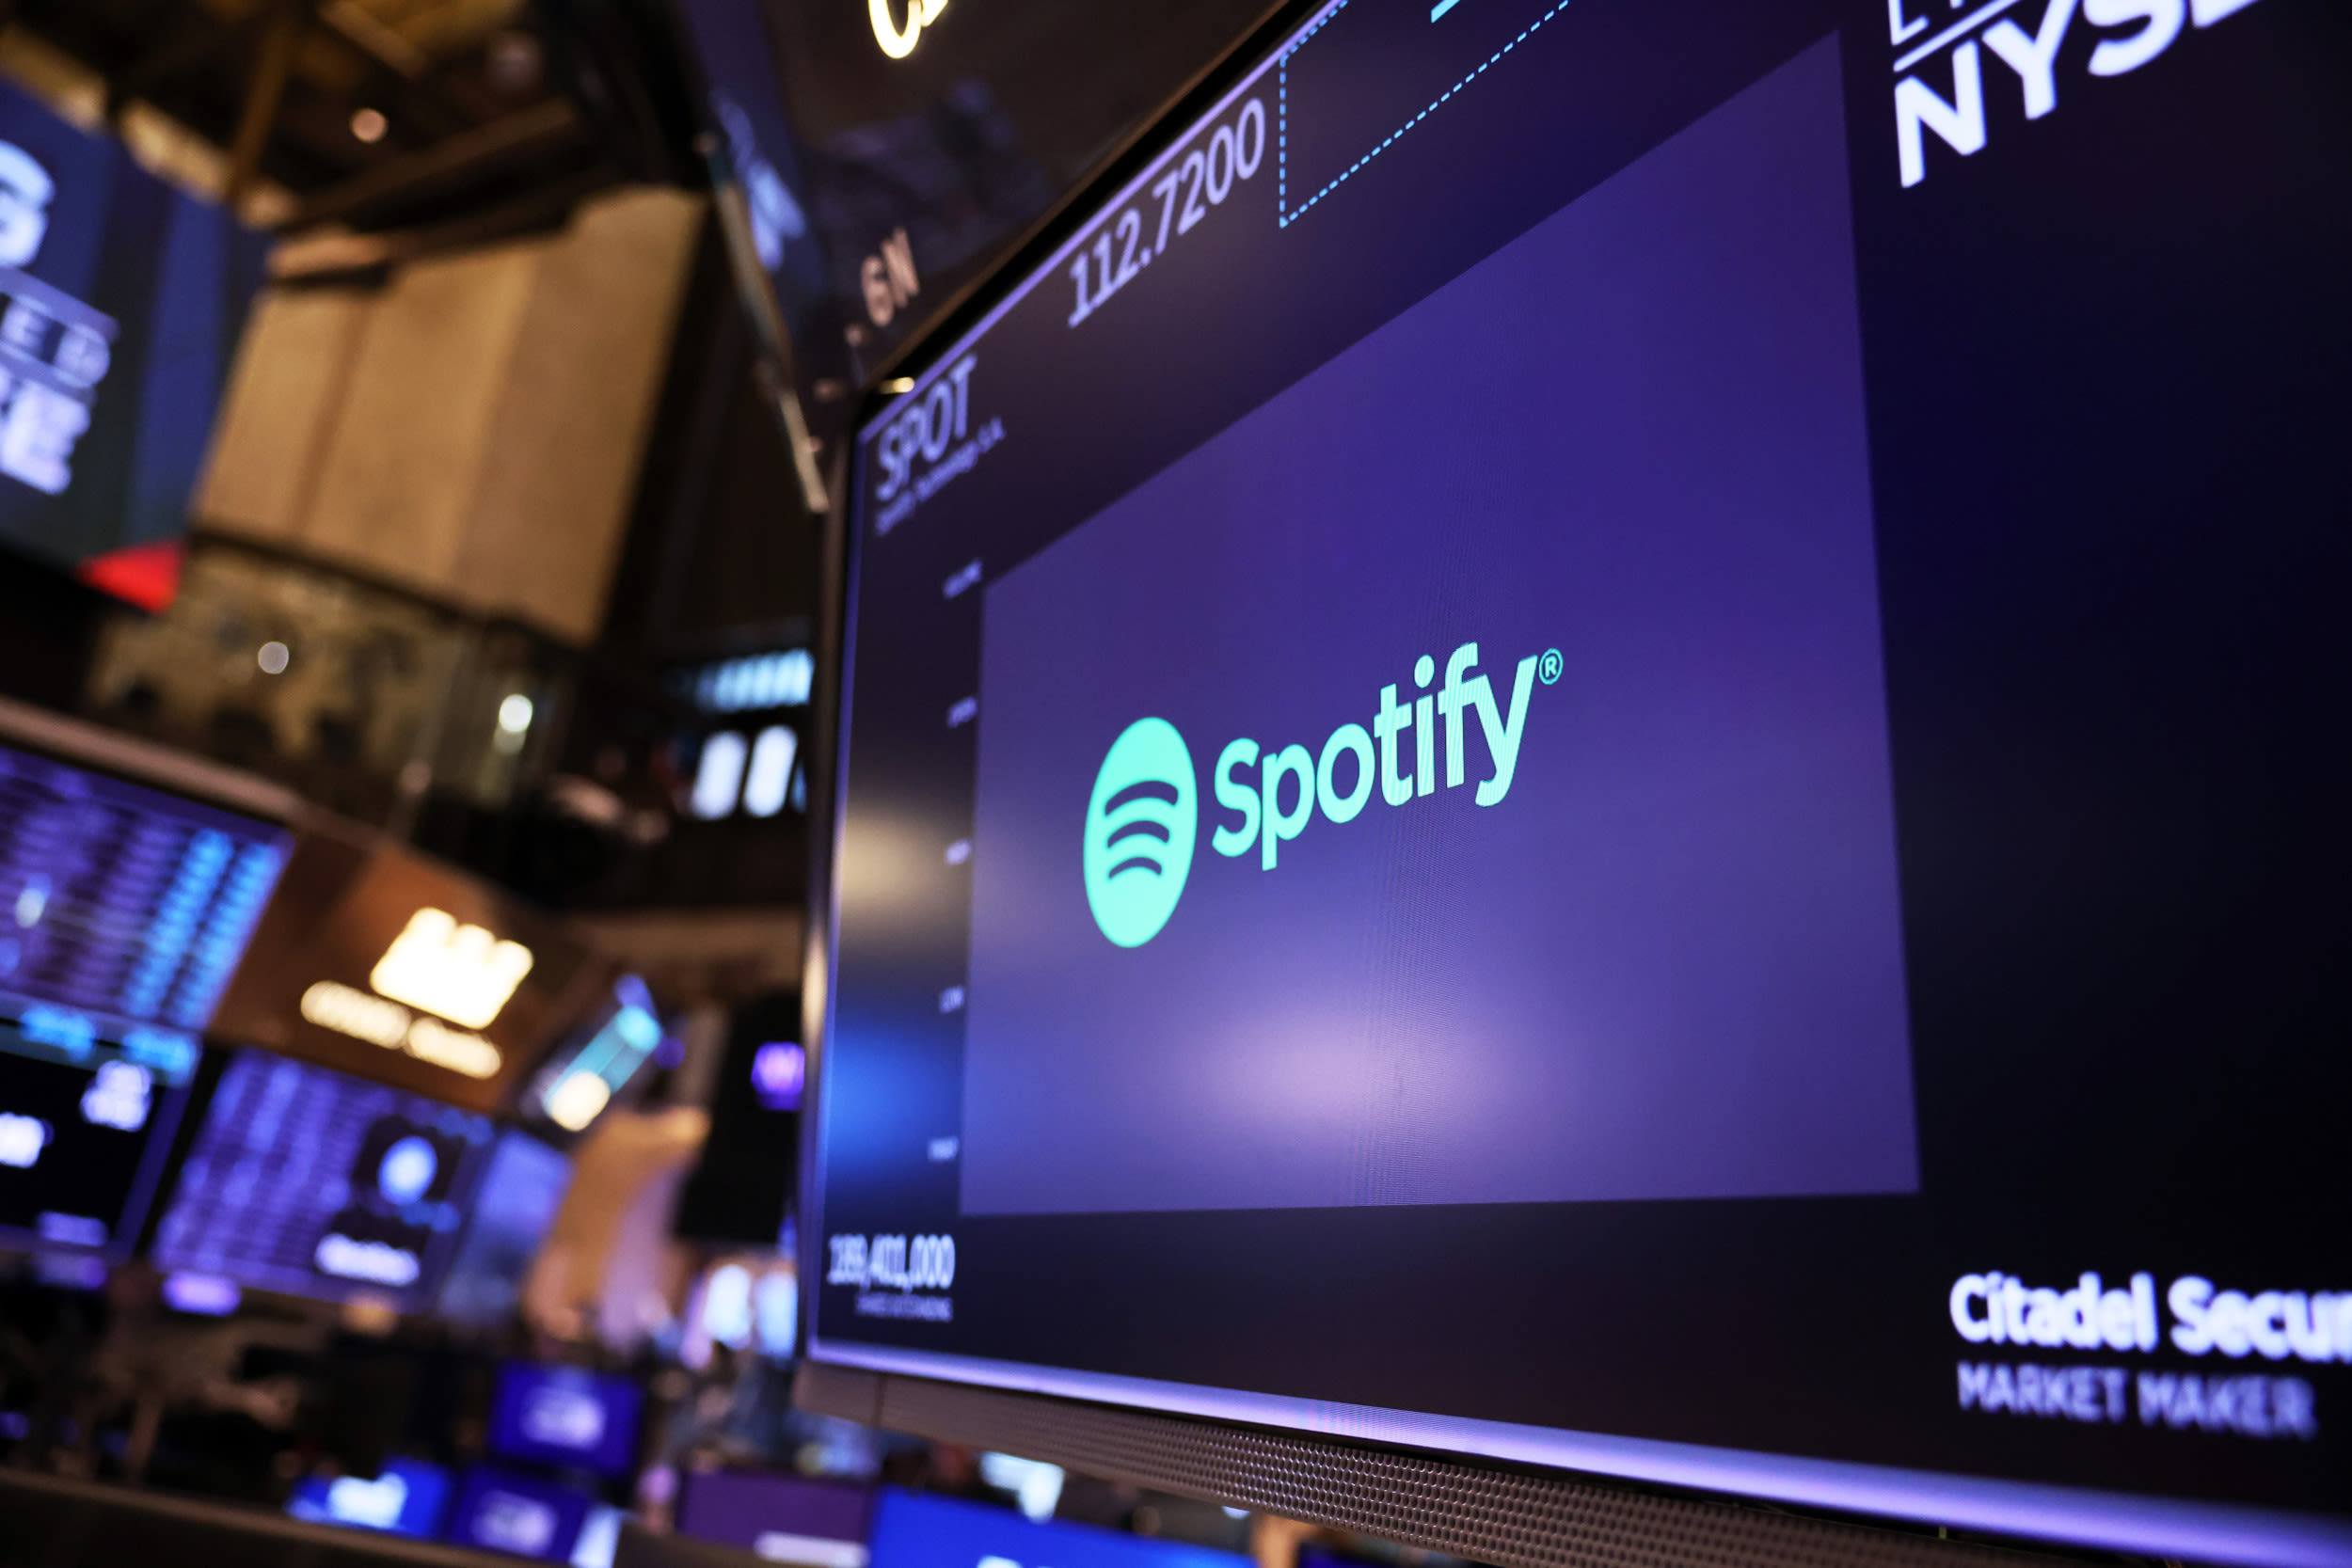 Spotify announces new price increase: What we know